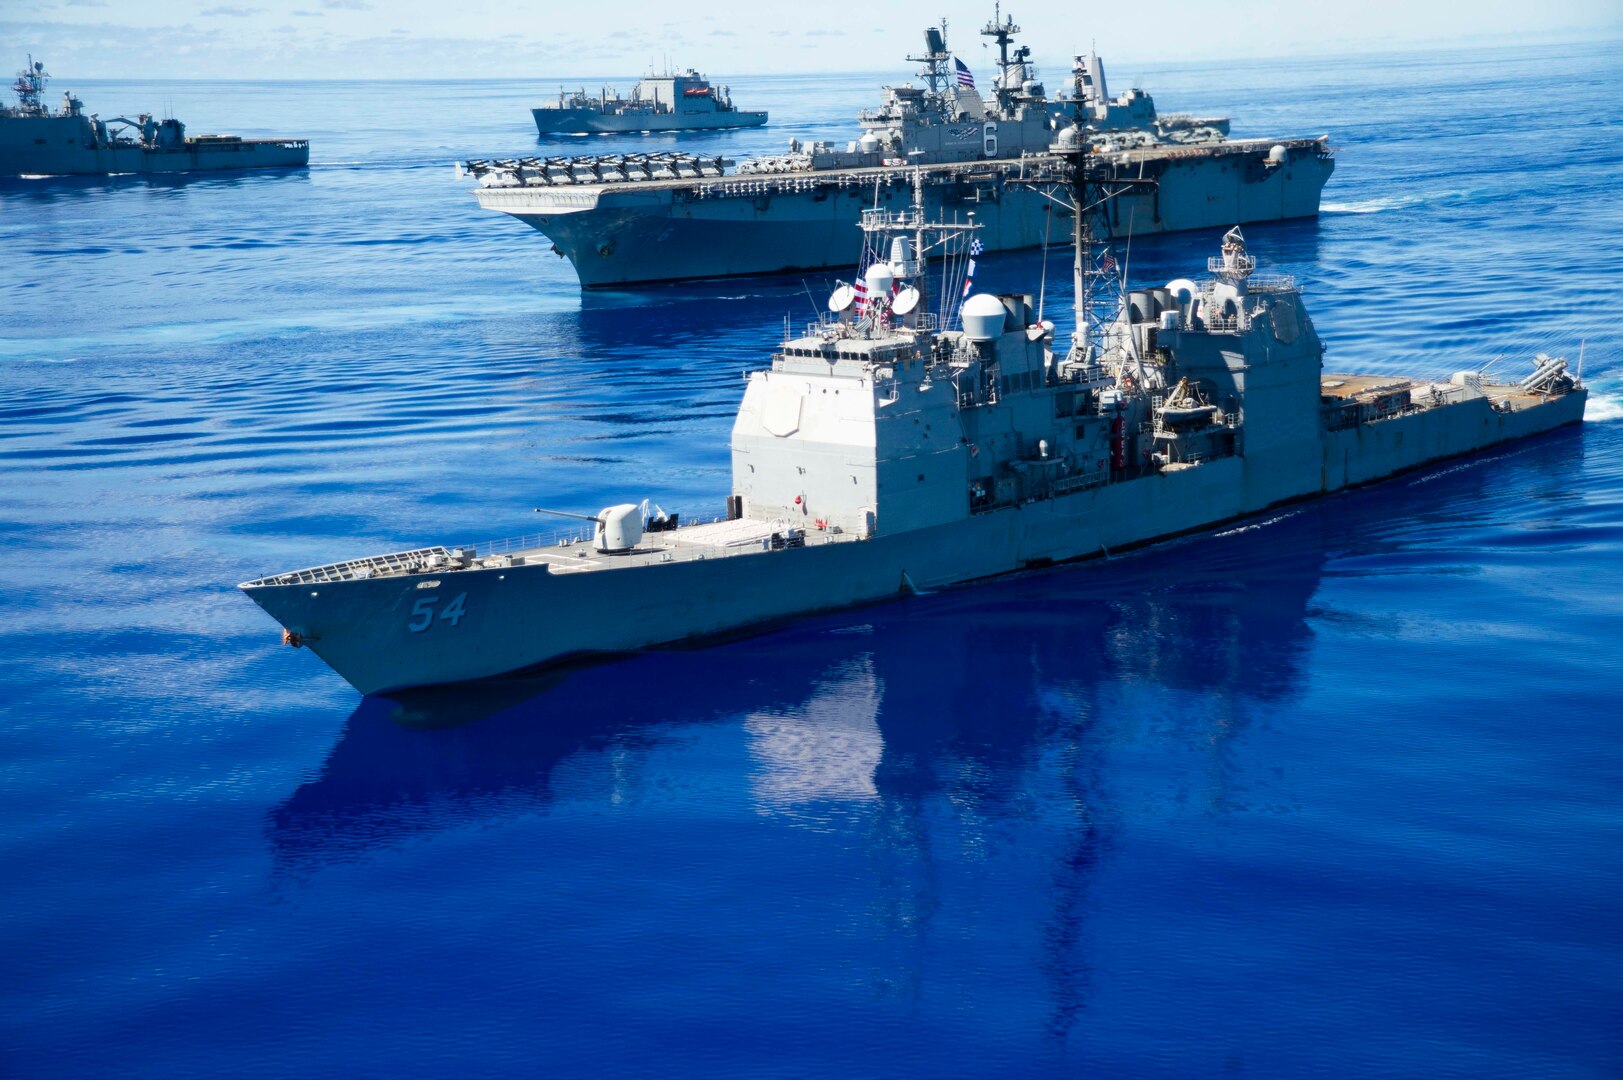 IMAGE: 200925-N-KP021-0313 PHILIPPINE SEA (Sept. 25, 2020) – USS Antietam (CG 54), USS American (LHA 6) and USNS Charles Drew (T-AKE 10) steam in formation in support of Valiant Shield 2020. Meanwhile, a team of Naval Surface Warfare Center Dahlgren Division (NSWCDD) scientists and engineers worked from two locations – Dahlgren, Va., and Honolulu, Hawaii – to ensure the success of this year’s Valiant Shield exercise. “Our biggest strategic accomplishment was supporting live forces, both afloat and at terrestrial sites, using a combined in-person and local operations team,” said Joseph Pack, NSWCDD deputy director for expeditionary warfare, regarding Dahlgren’s impact on the exercise that focuses on the integration of joint training in a blue-water environment among U.S. forces.   (U.S. Navy photo by Mass Communication Specialist 2nd Class Codie L. Soule)